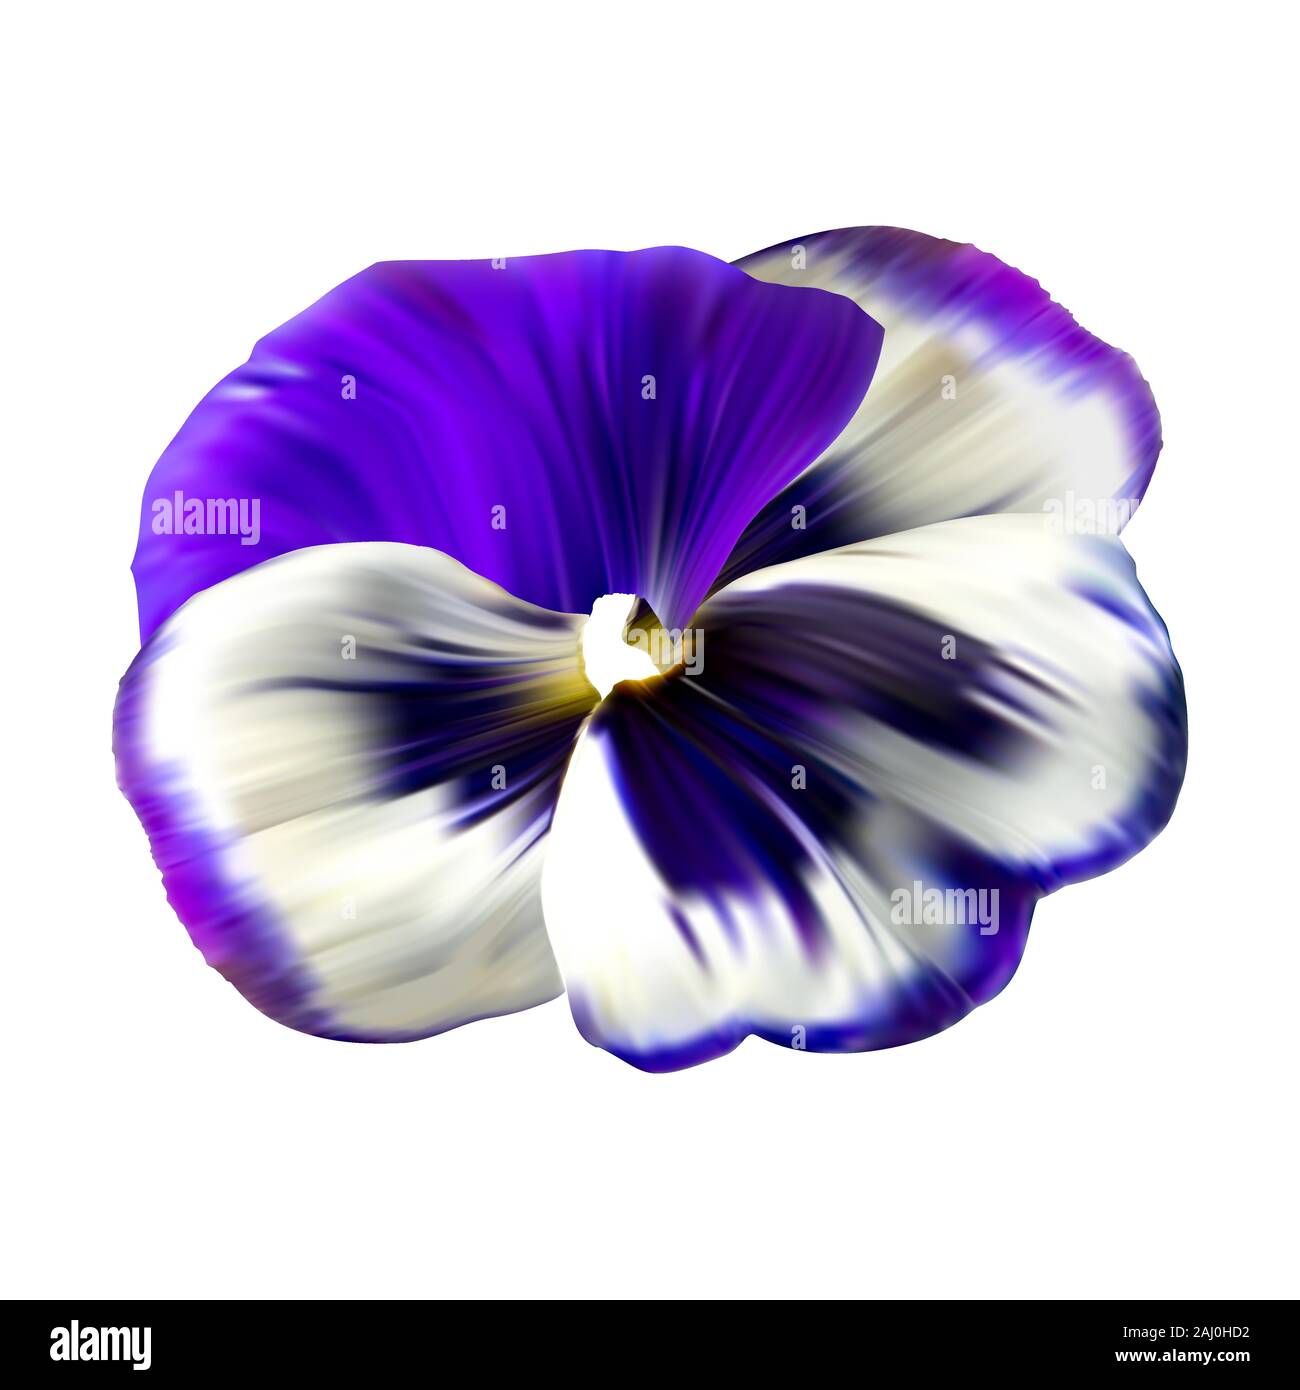 Colorful flower background with pansies flowers. Winter natural flower Wallpaper. Stock Vector